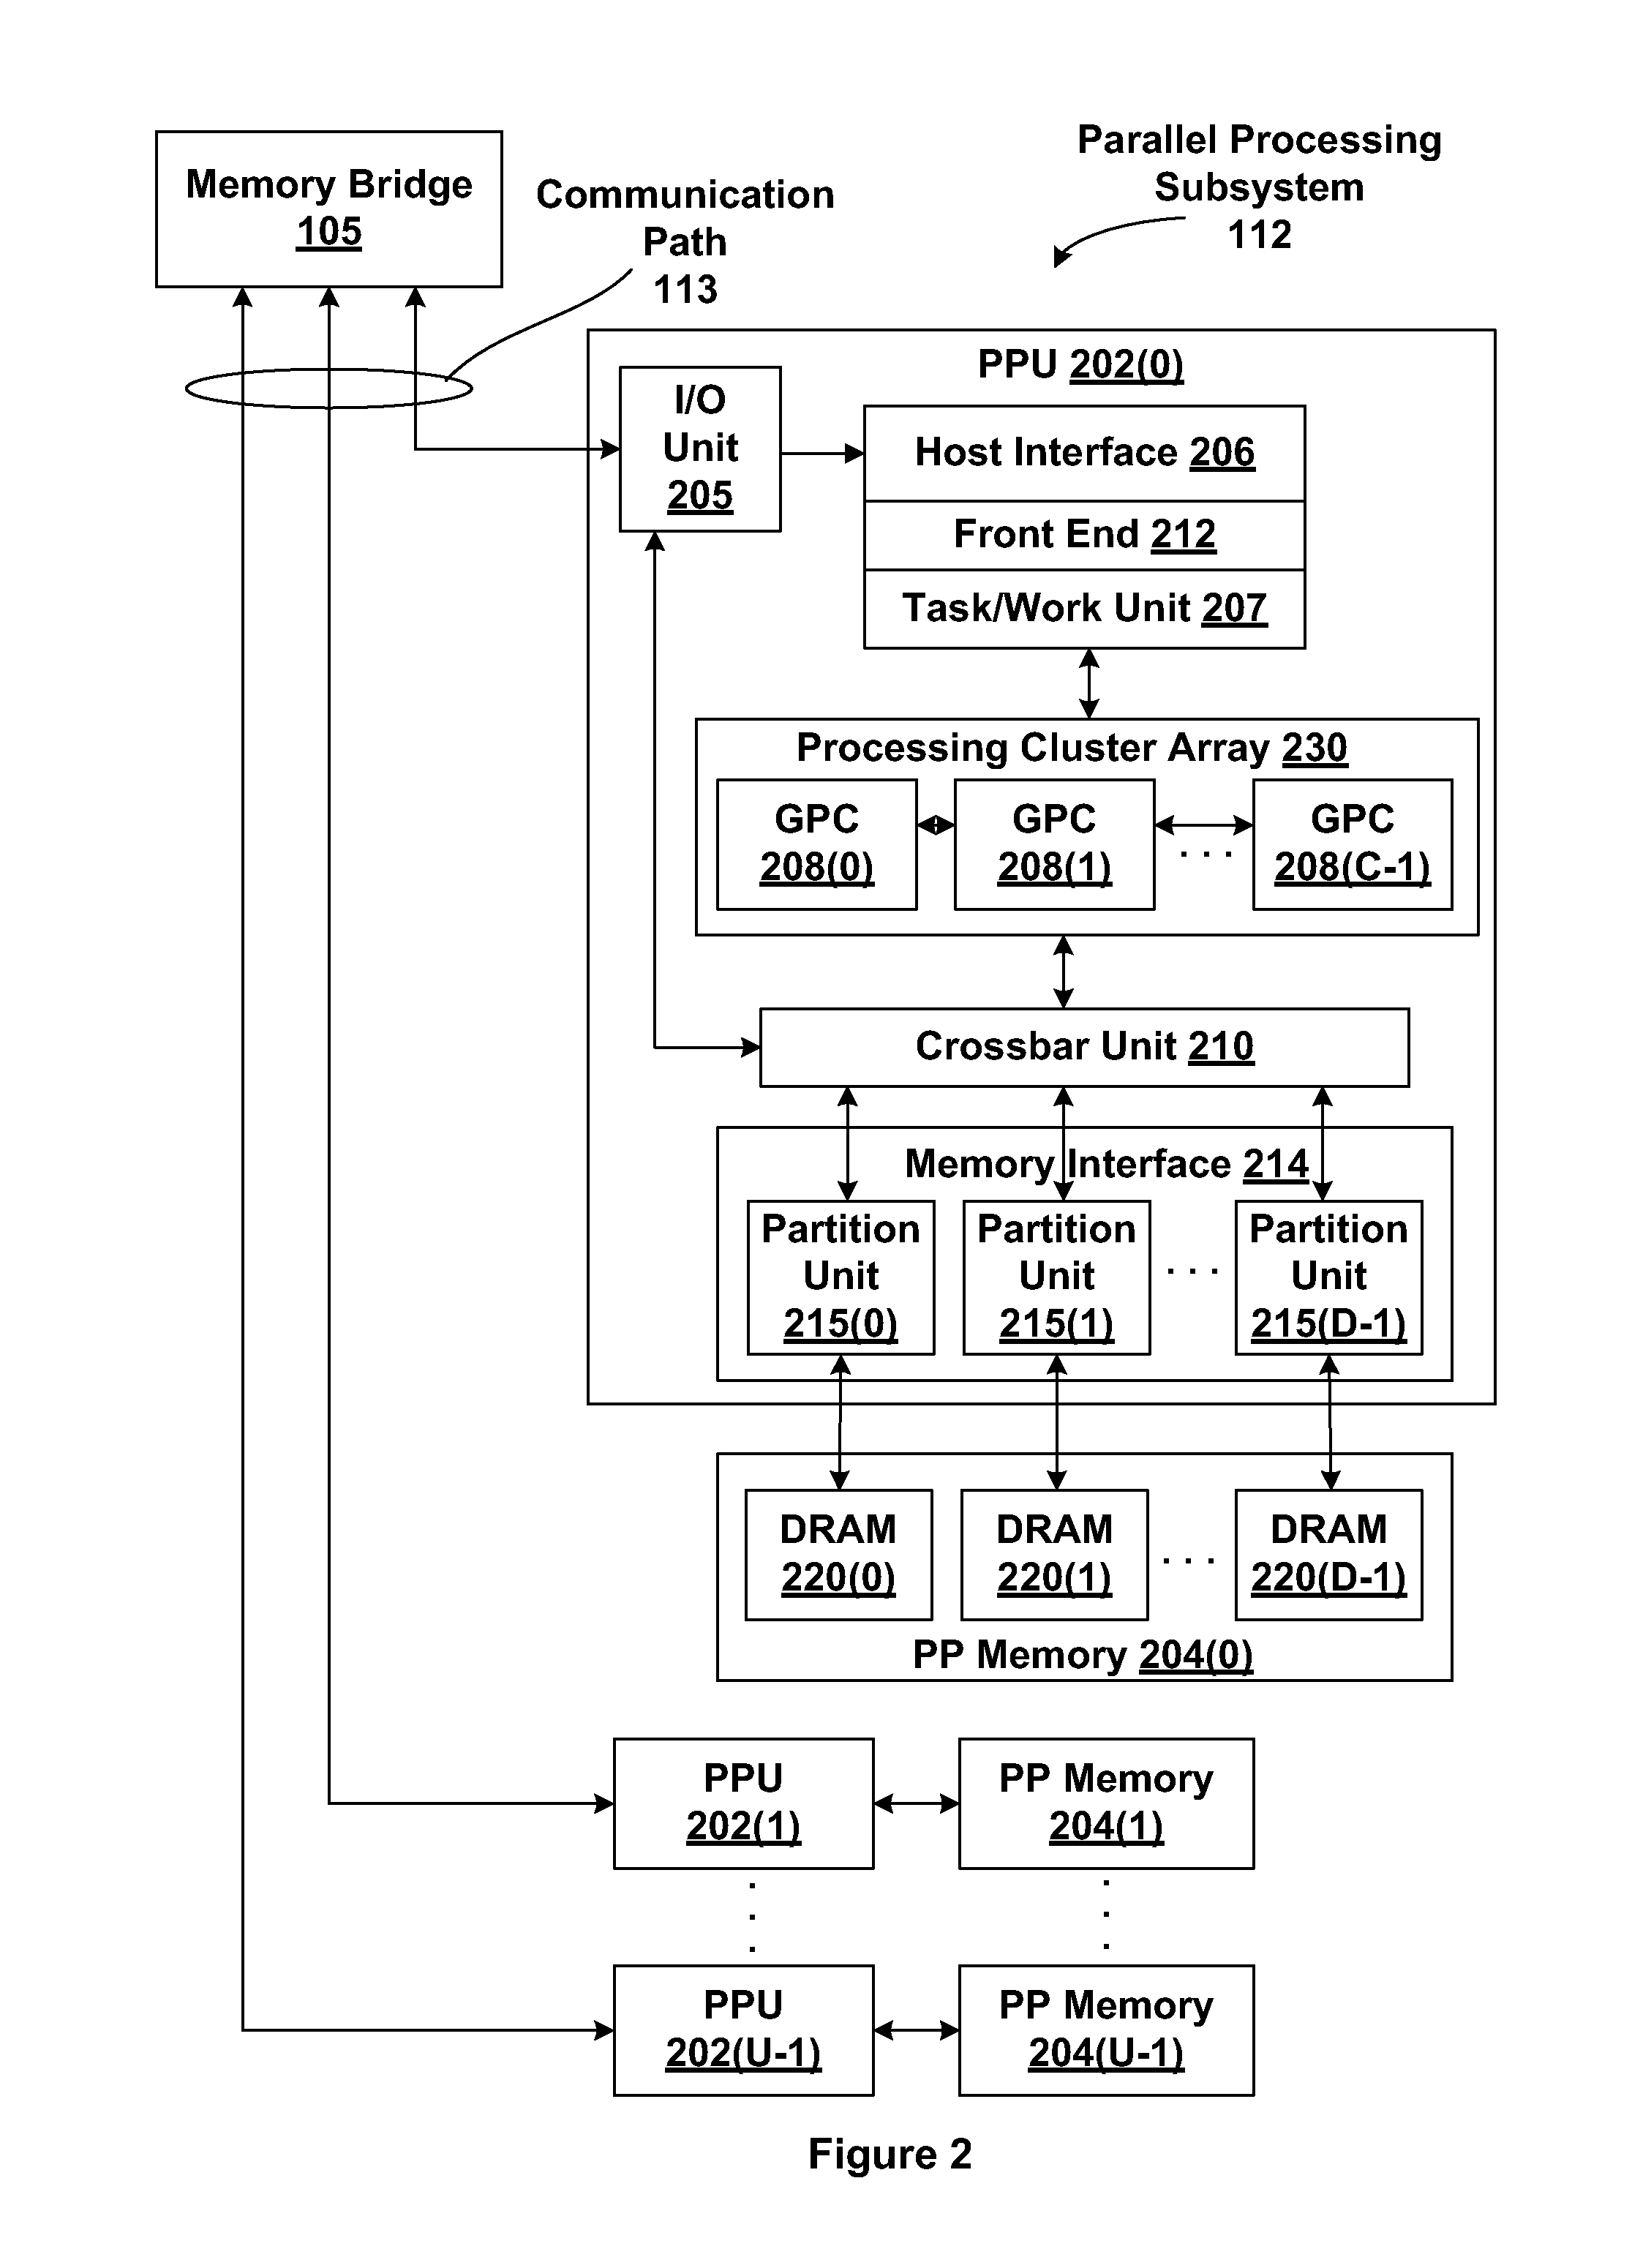 Control mechanism for fine-tuned cache to backing-store synchronization